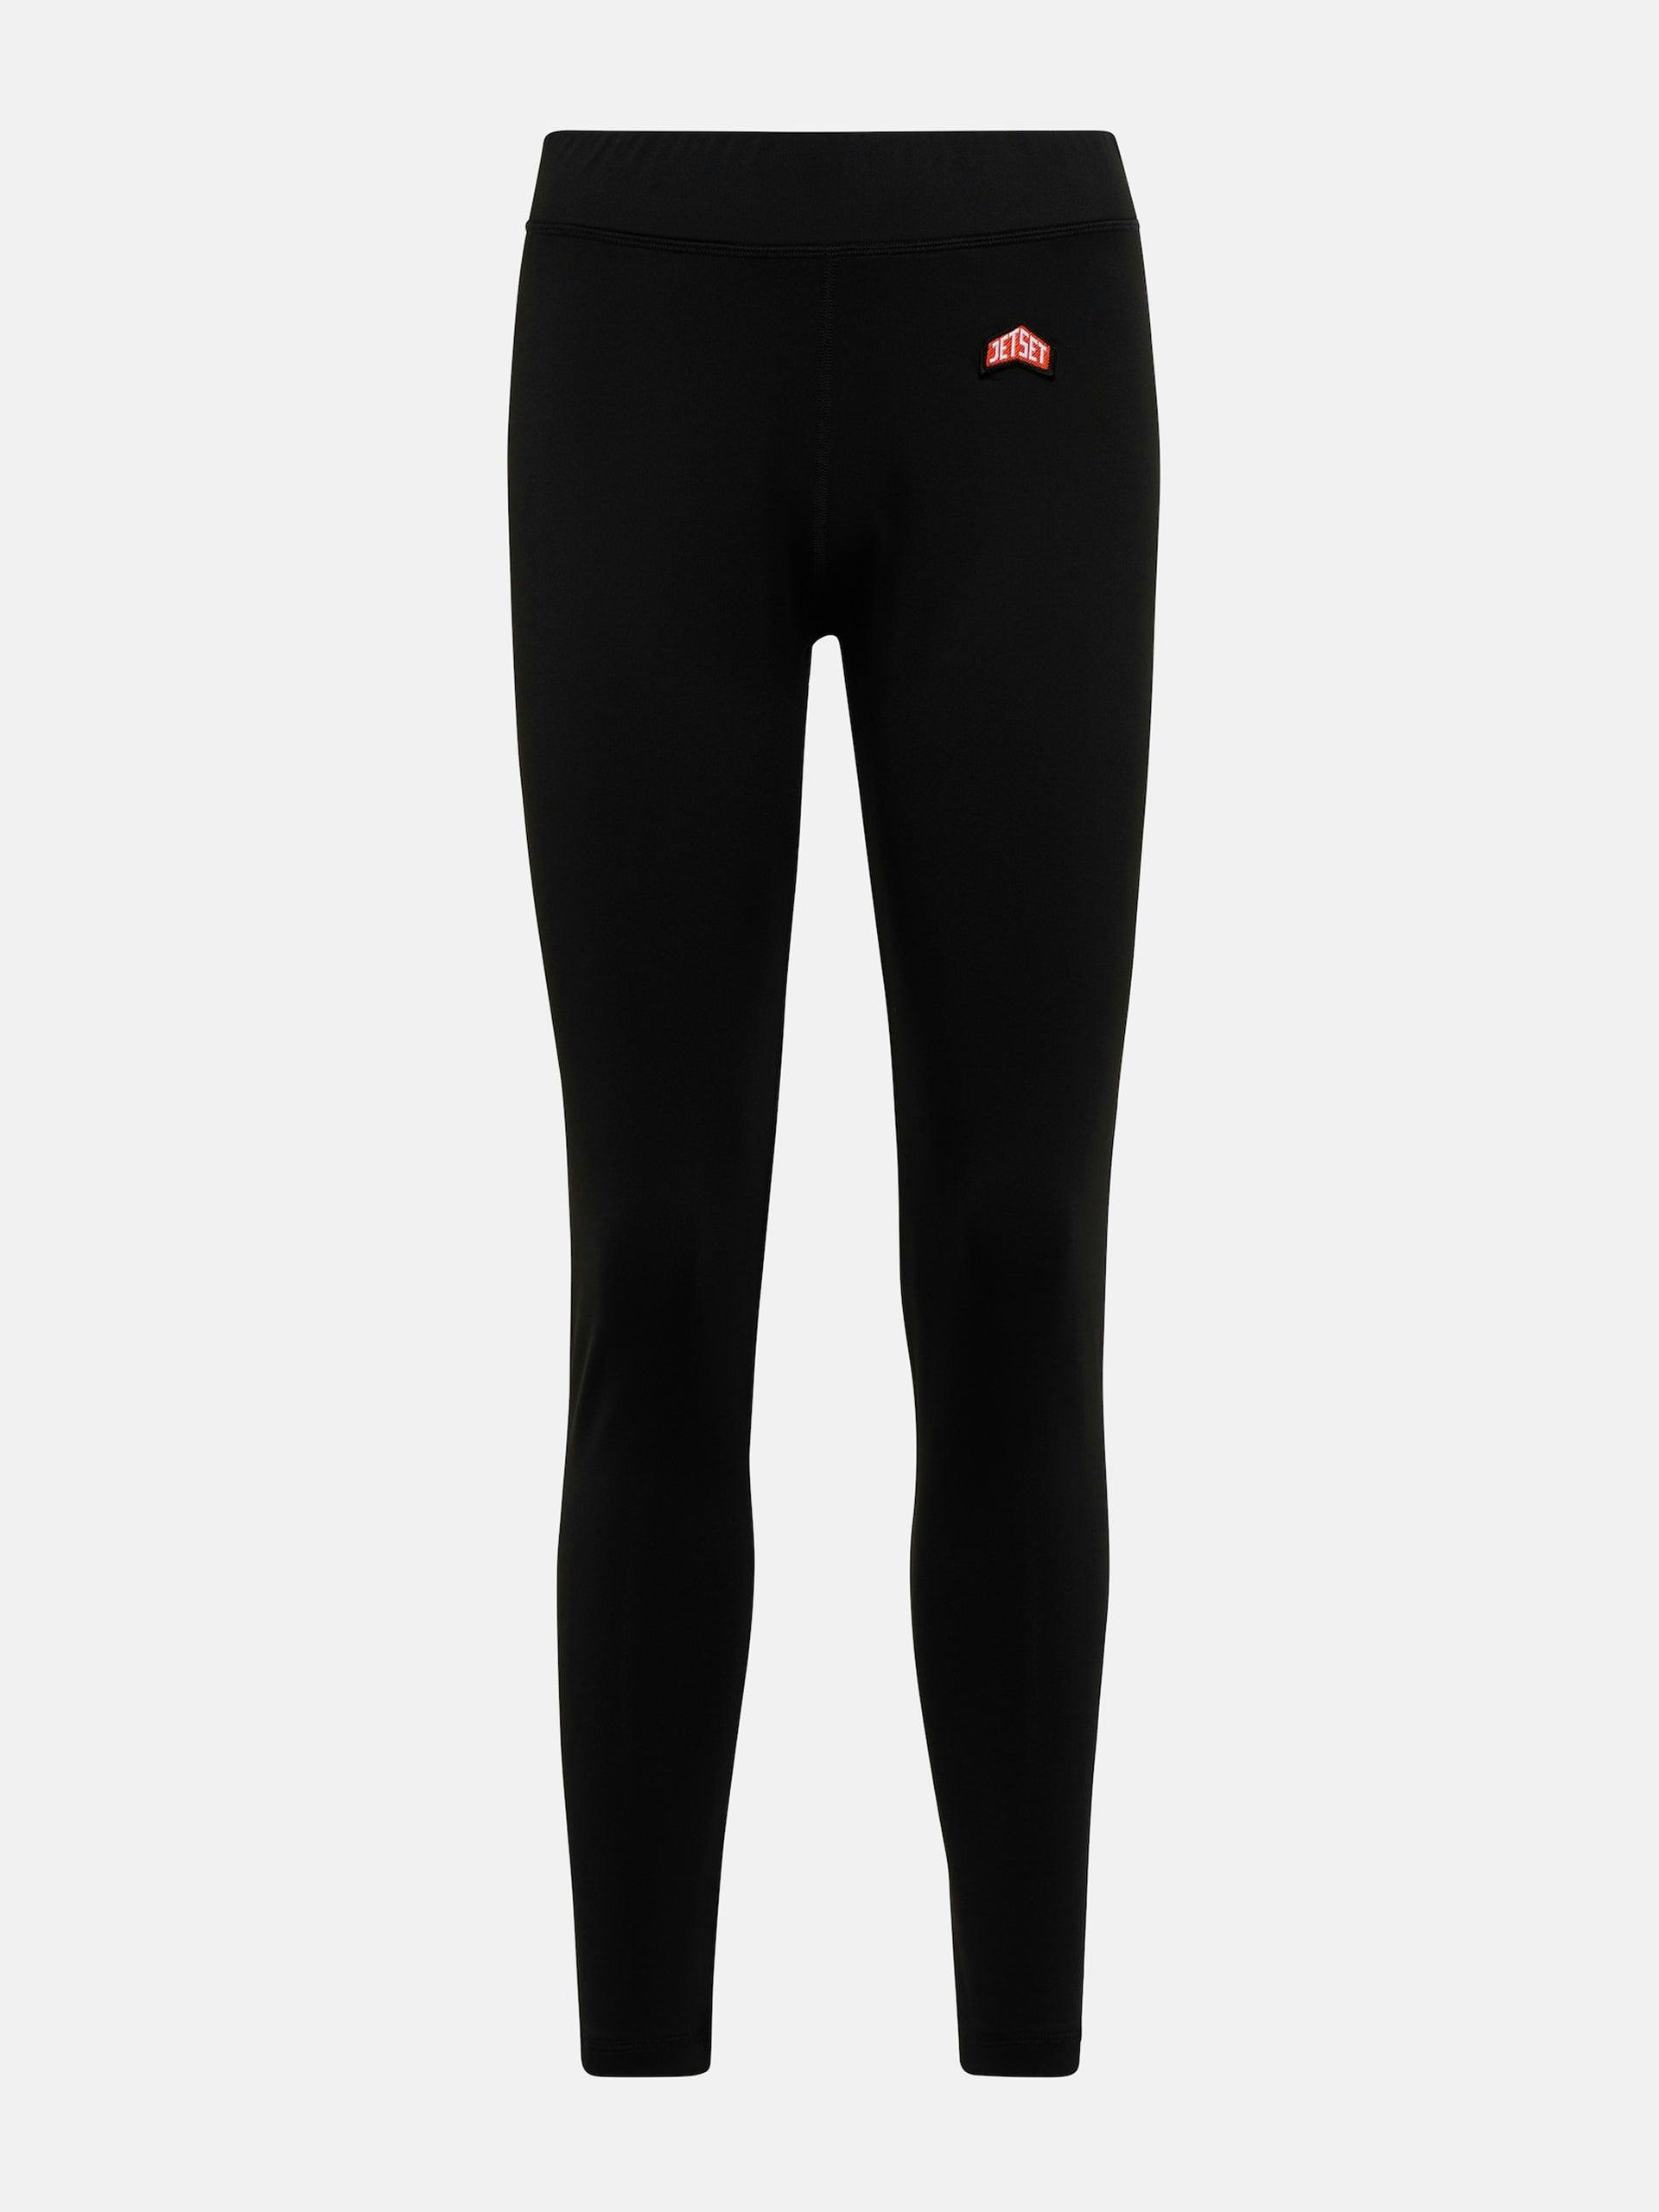 Mid-rise leggings with embroidered logo